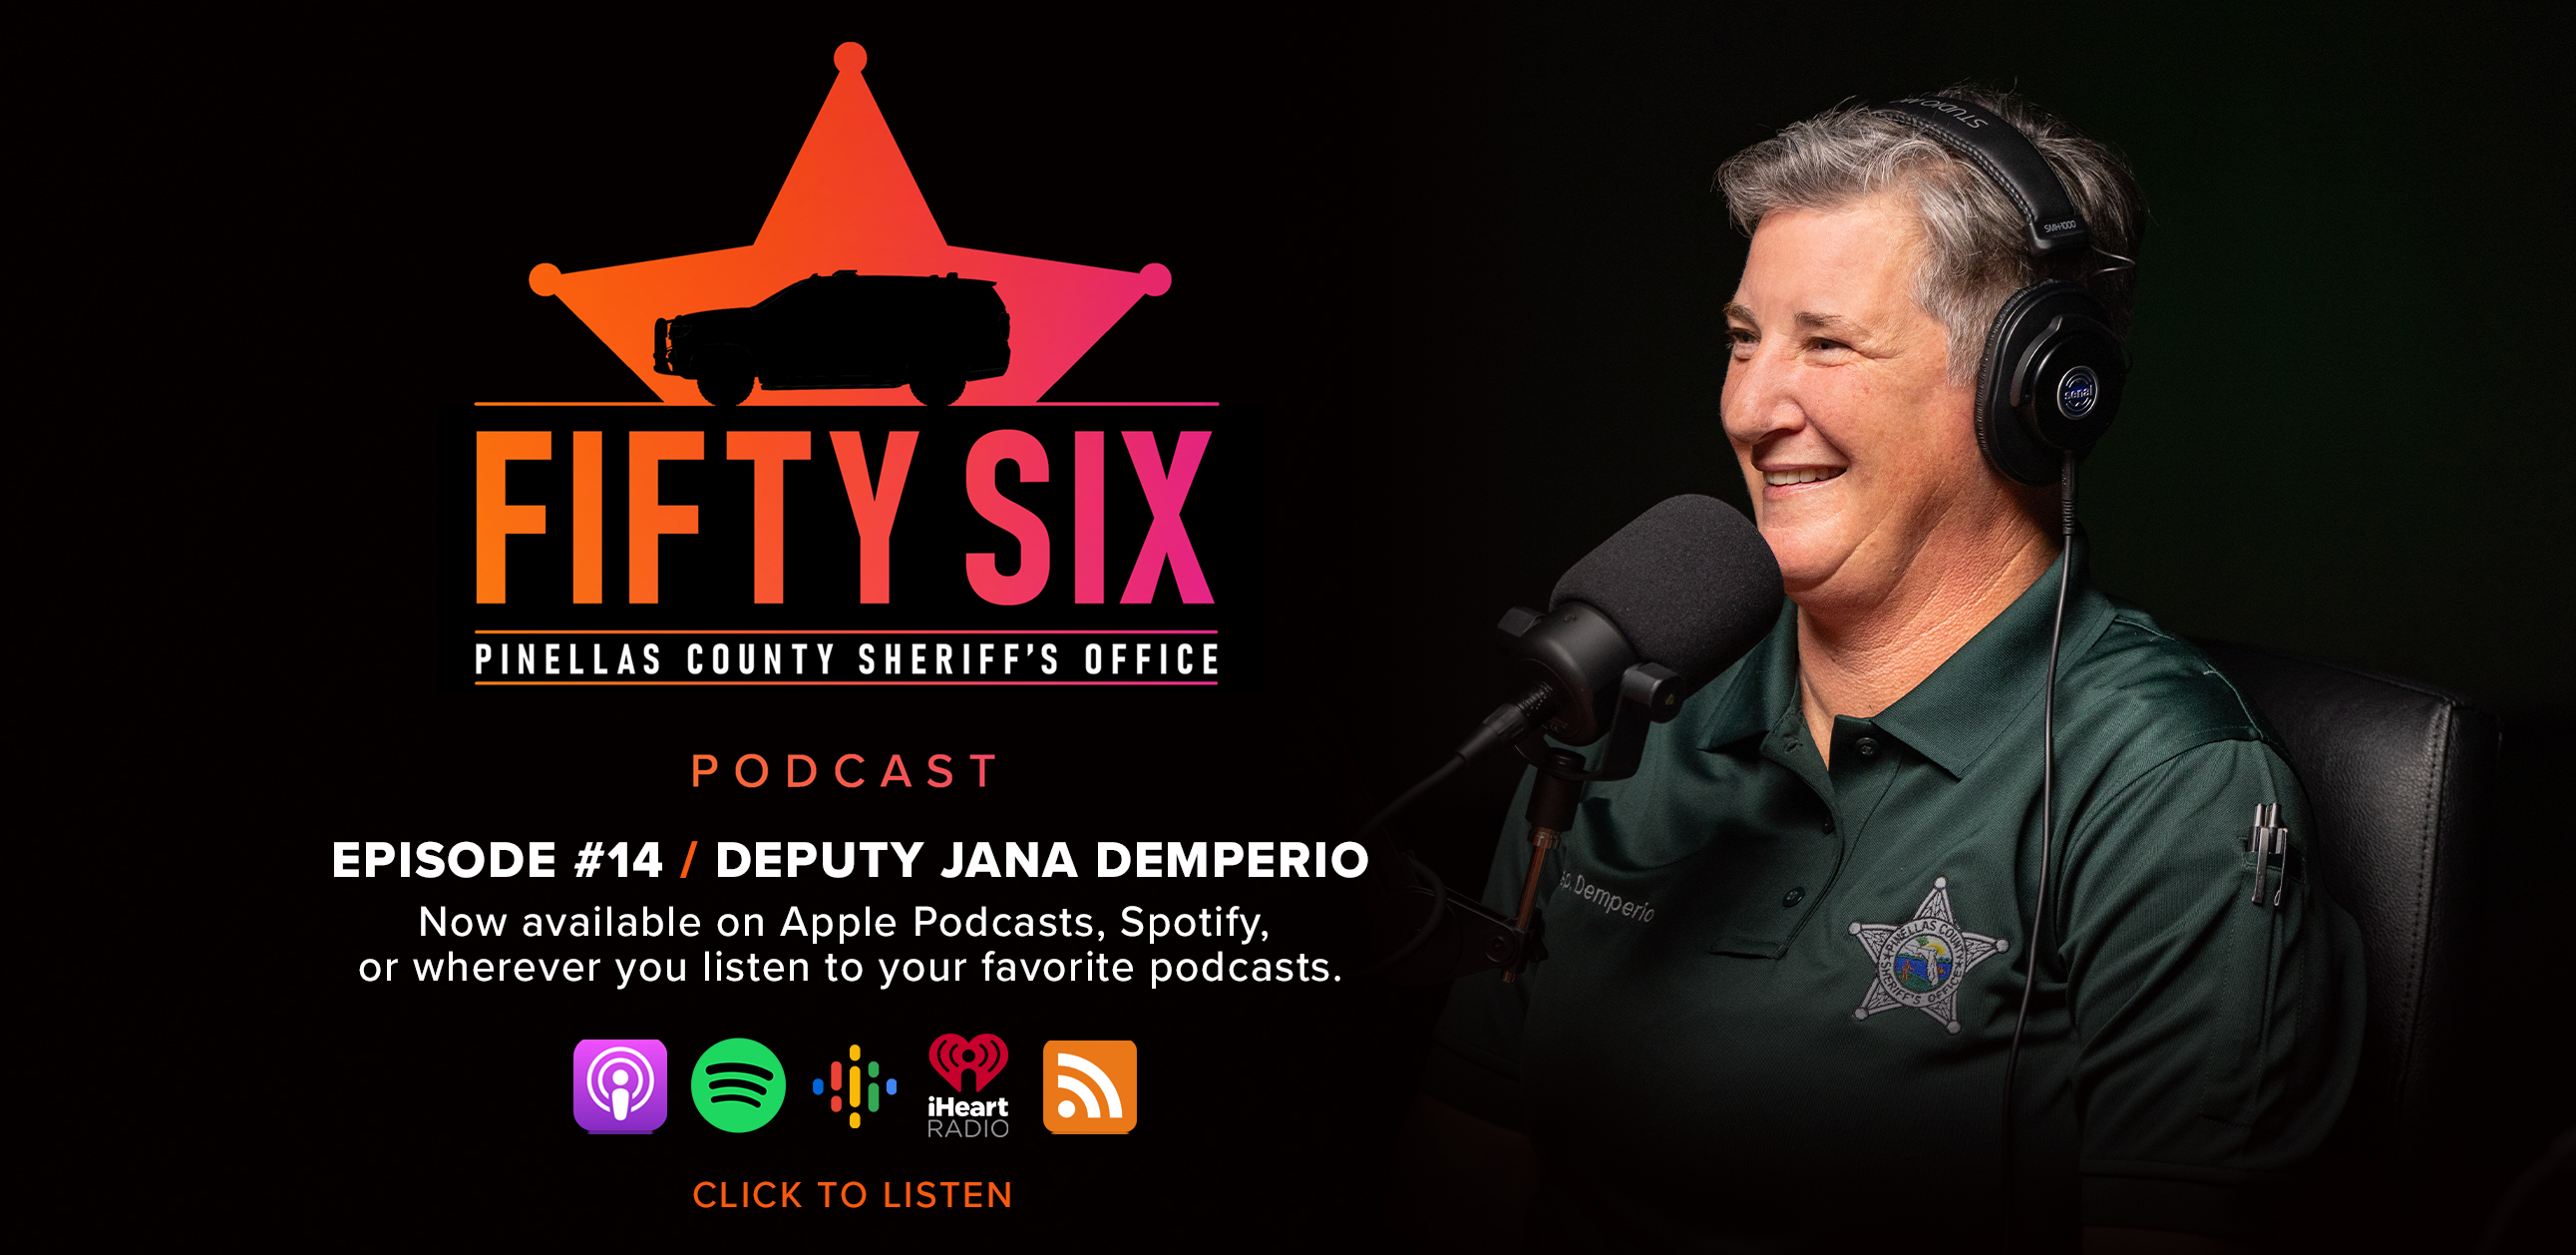 56 Podcast, Episode 14 Deputy Jana Demperio, now available wherever you listen to your favorite podcasts.